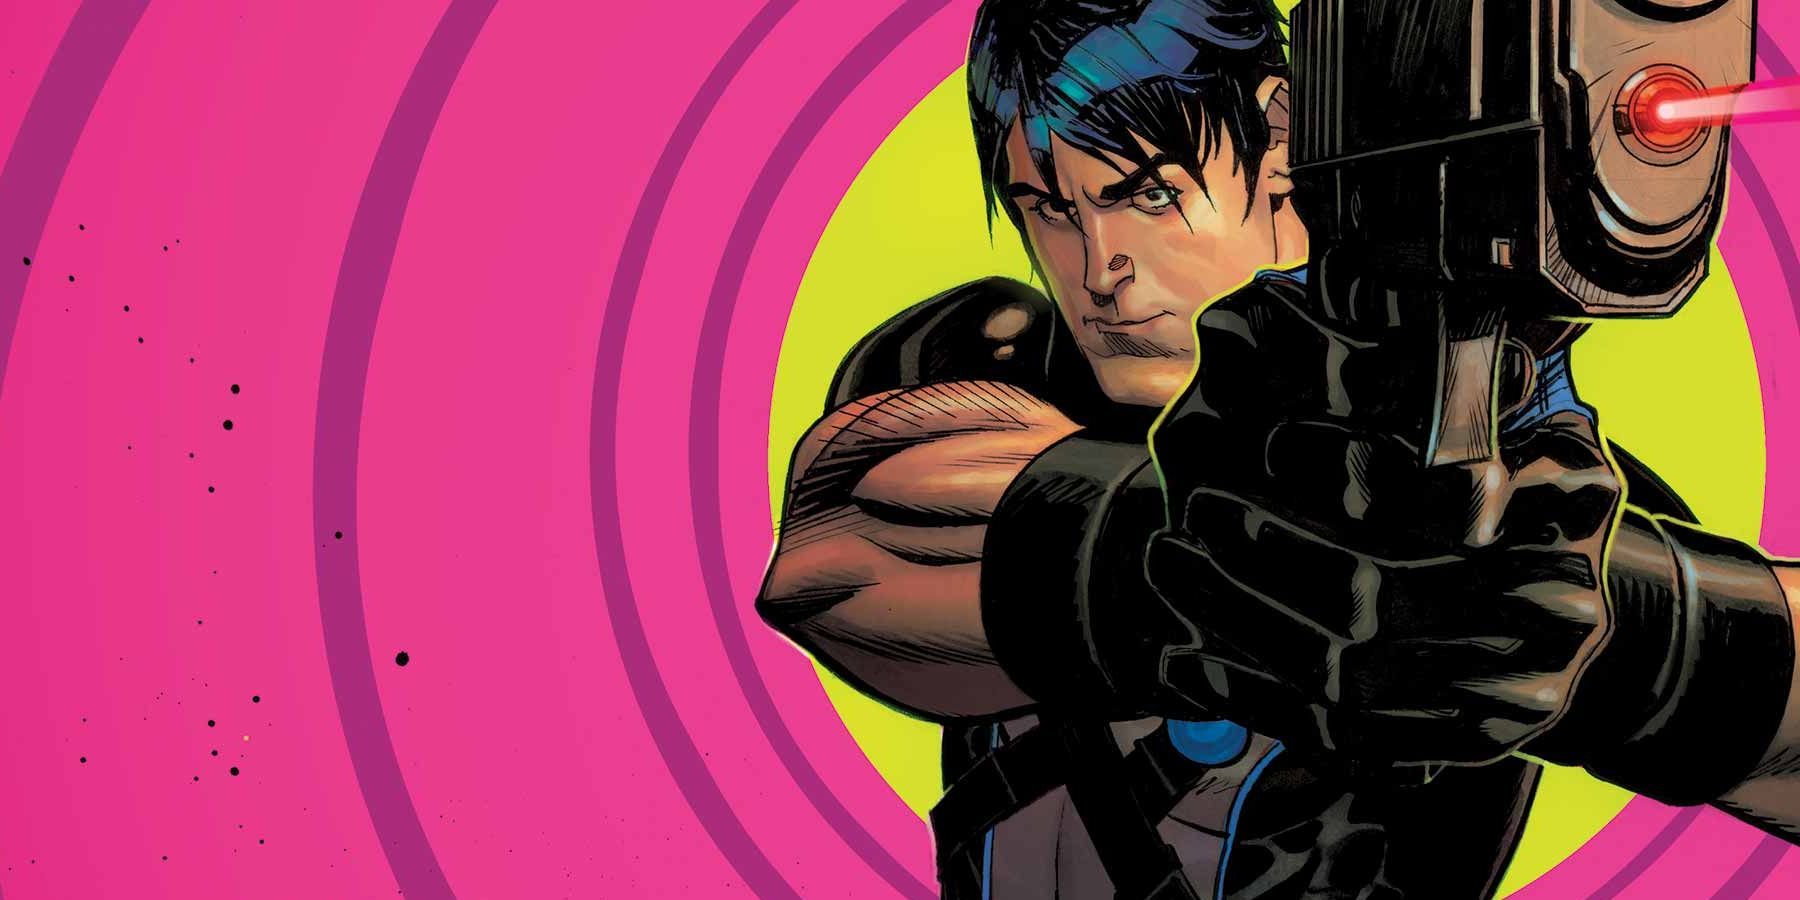 Dick Grayson Agent of Spyral